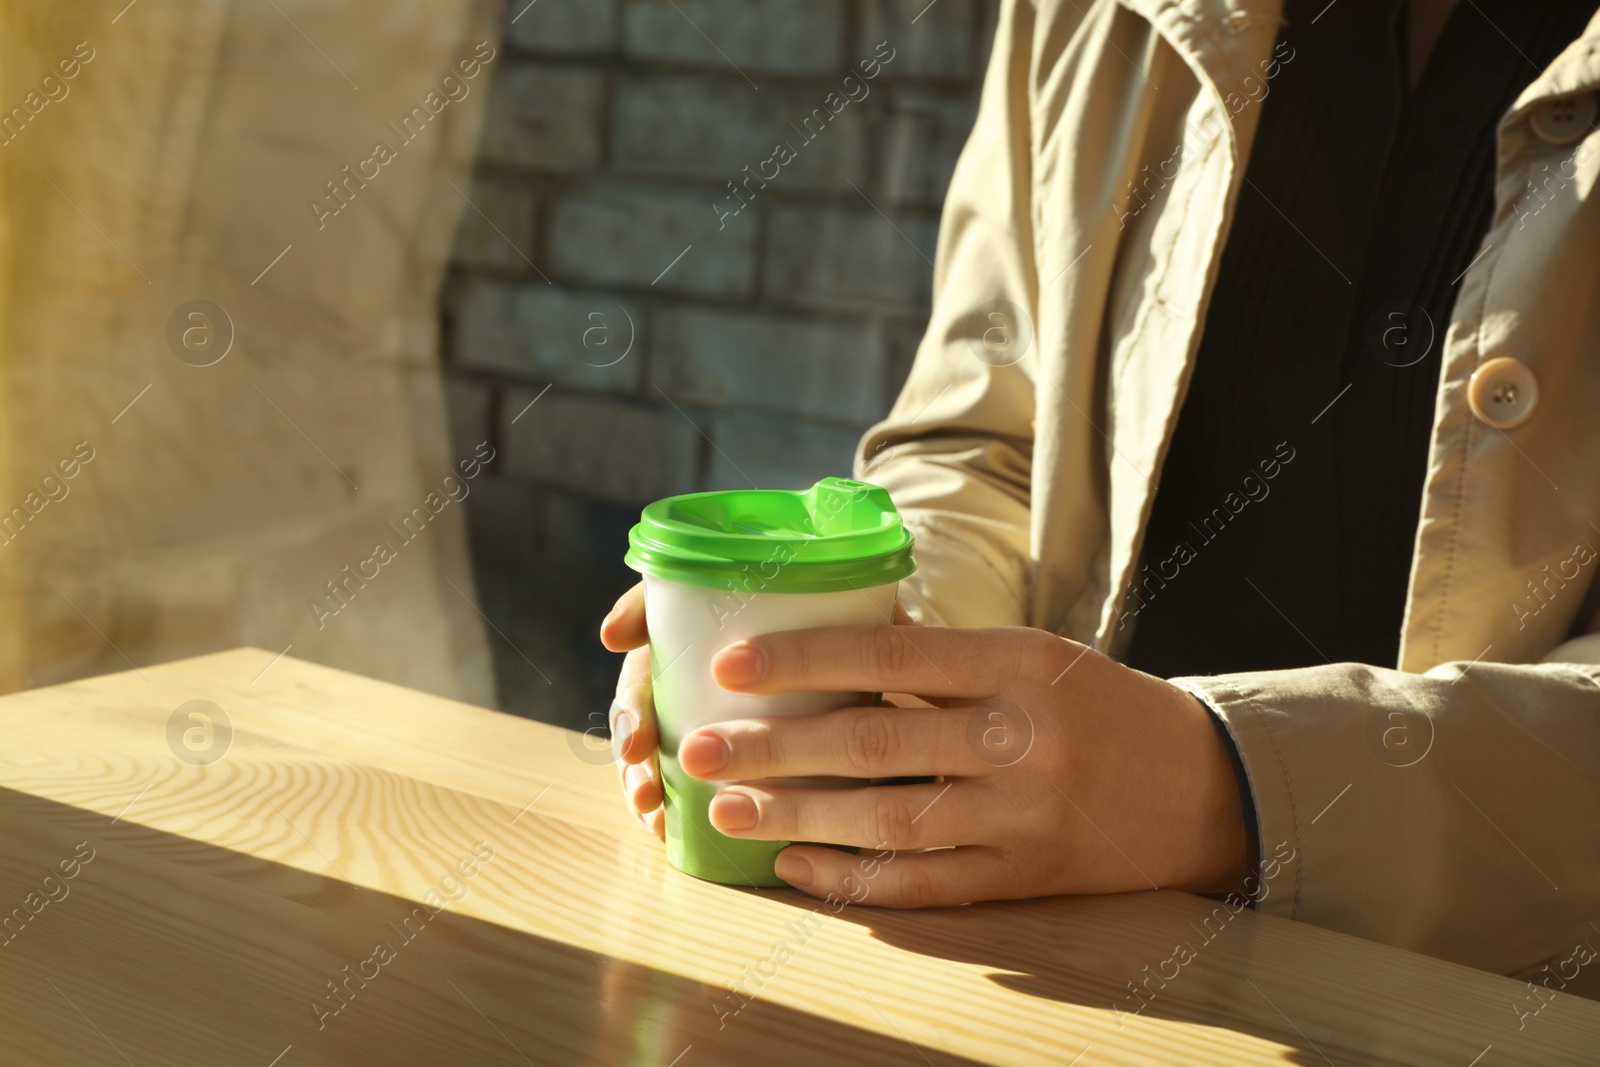 Photo of Woman with cup of fresh aromatic coffee at table in cafe